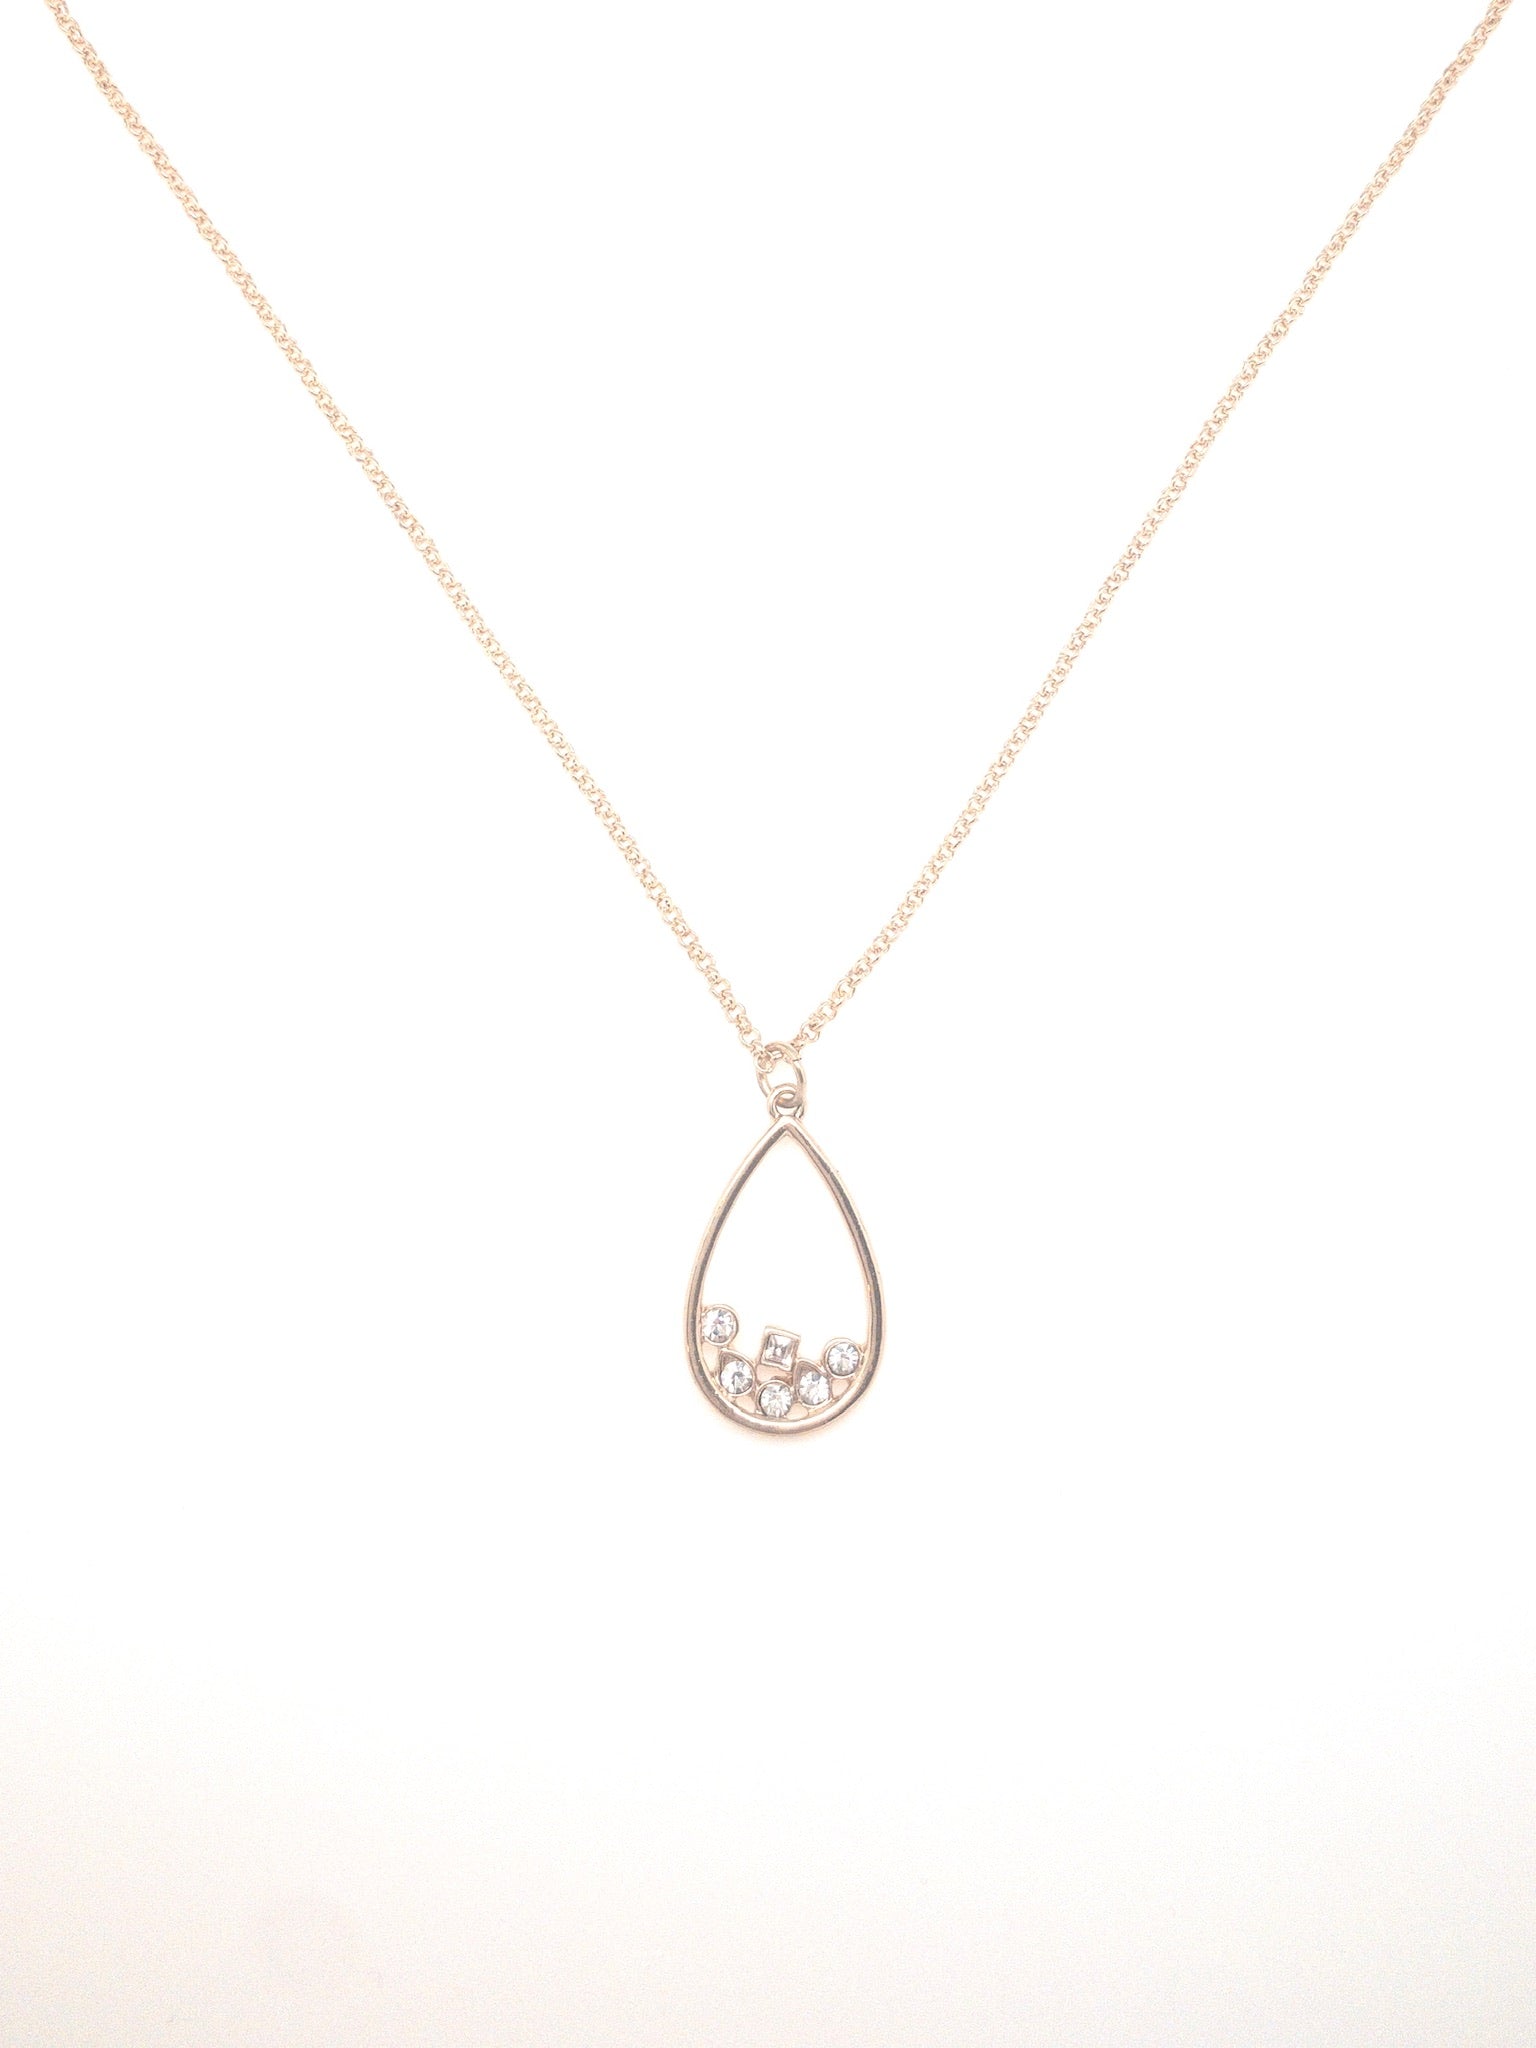 Rowan Drop shaped necklace in gold with tiny crystals inside